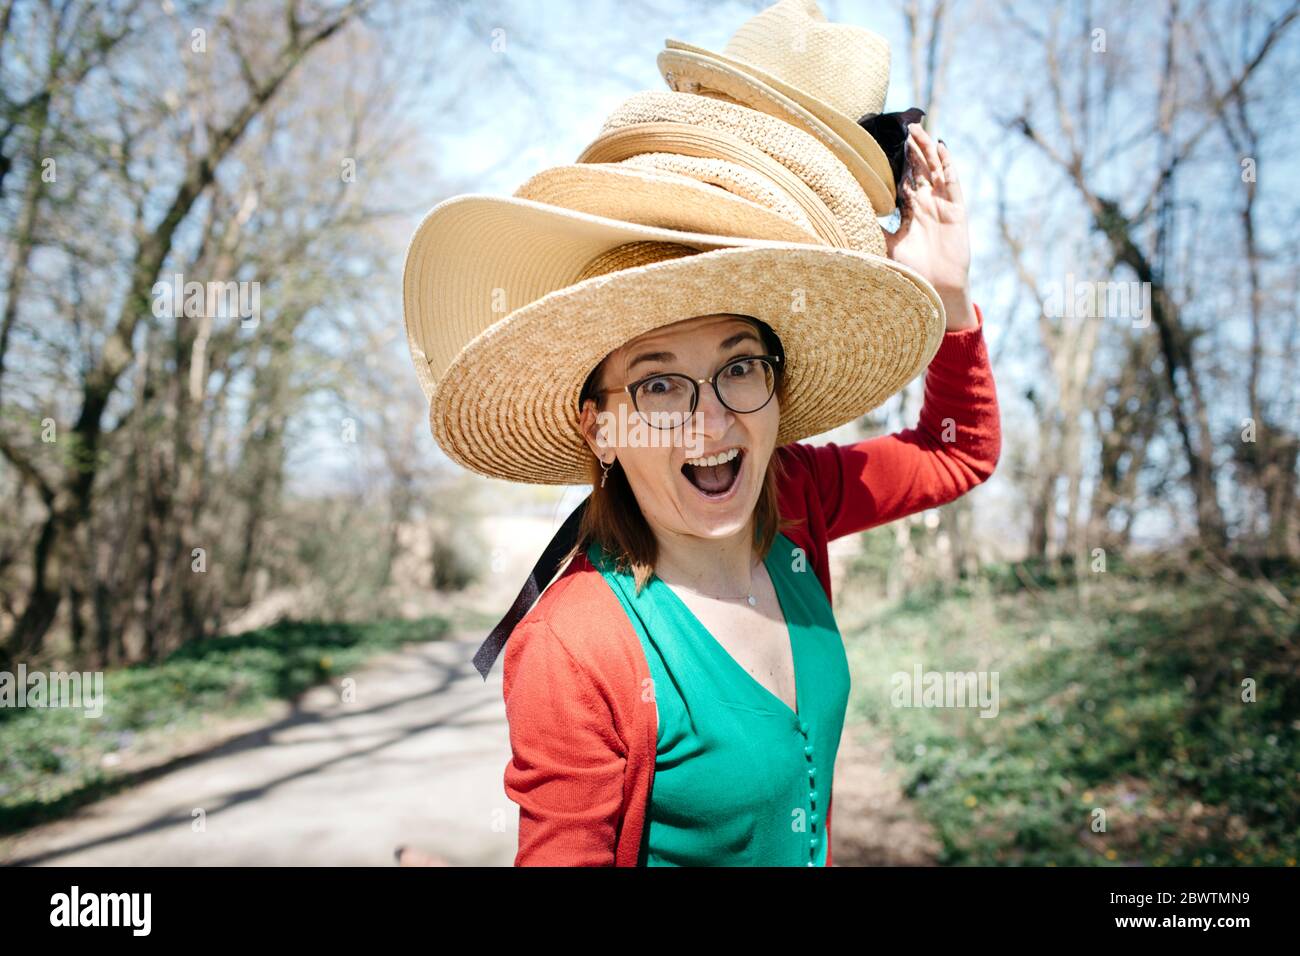 Portrait of mature woman with stack of straw hats on her head pulling funny faces Stock Photo